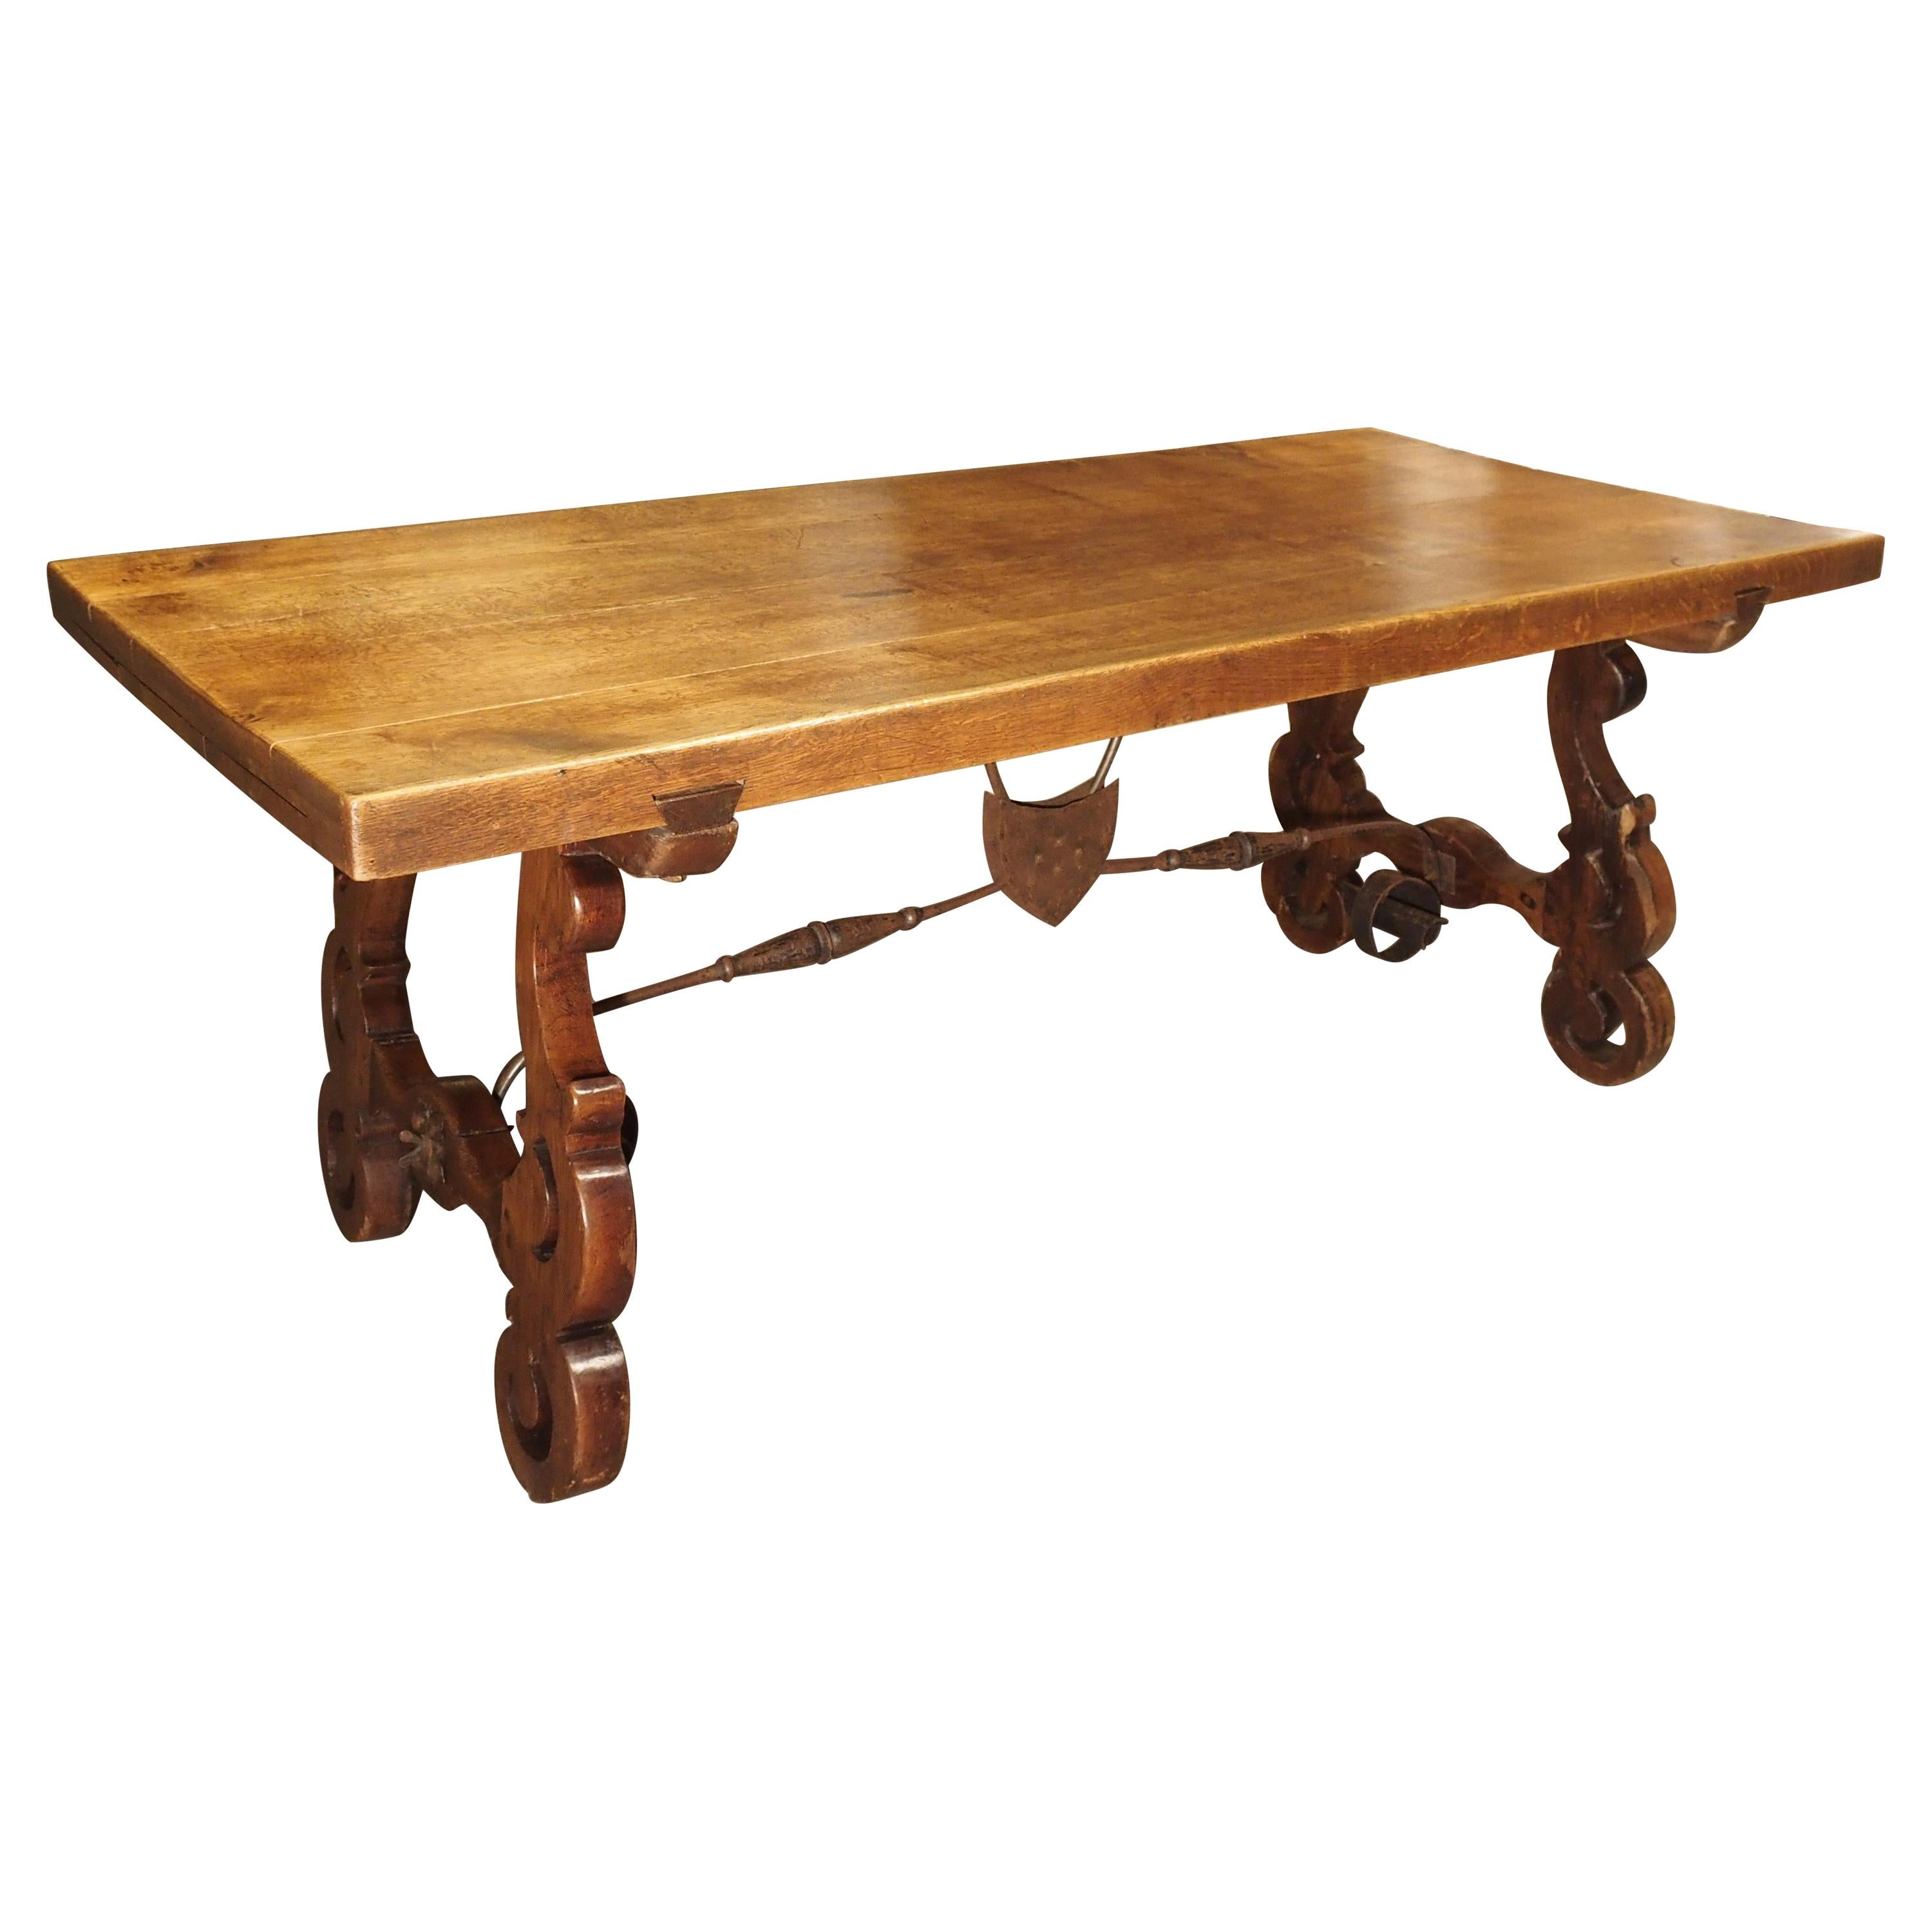 Antique Spanish Oak Table with Wrought Iron Stretcher